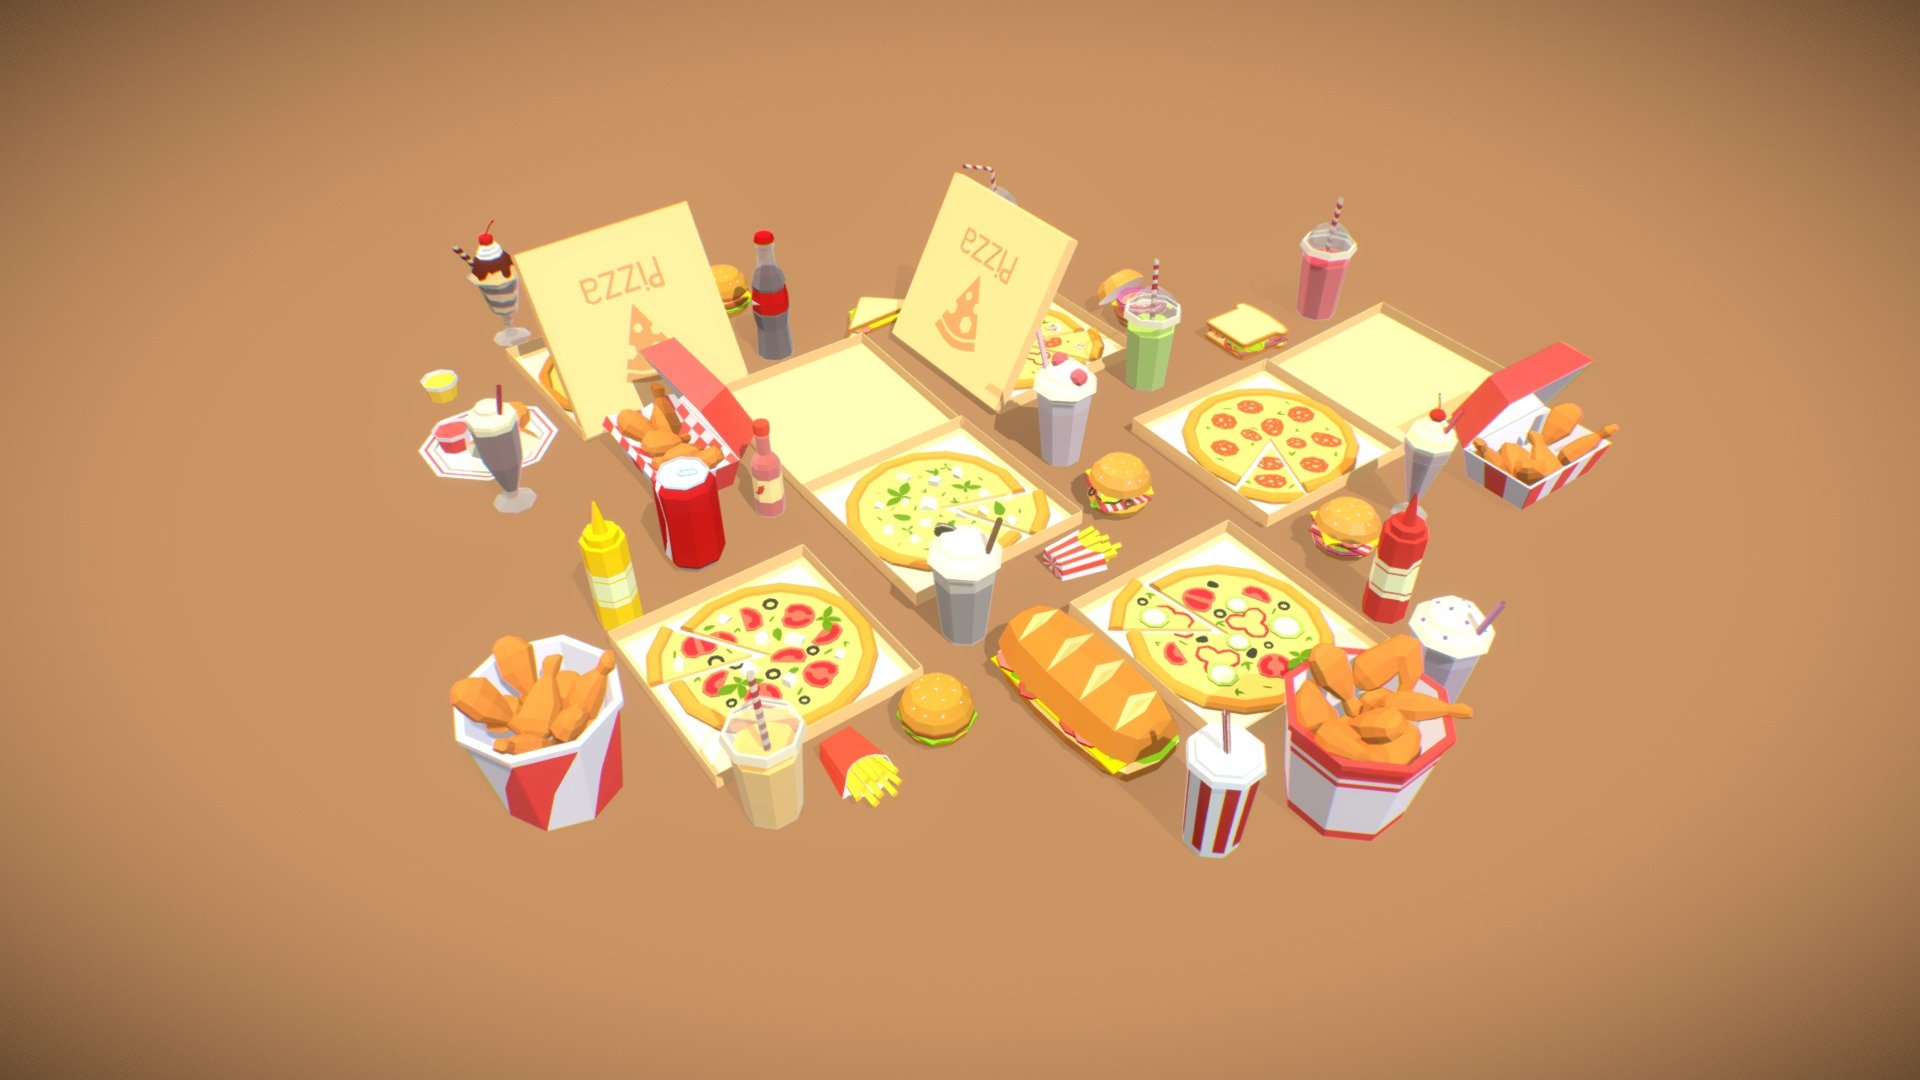 Low-poly fast food models contain 5 types of pizza with some fried chicken and a variety of drinks 3d model